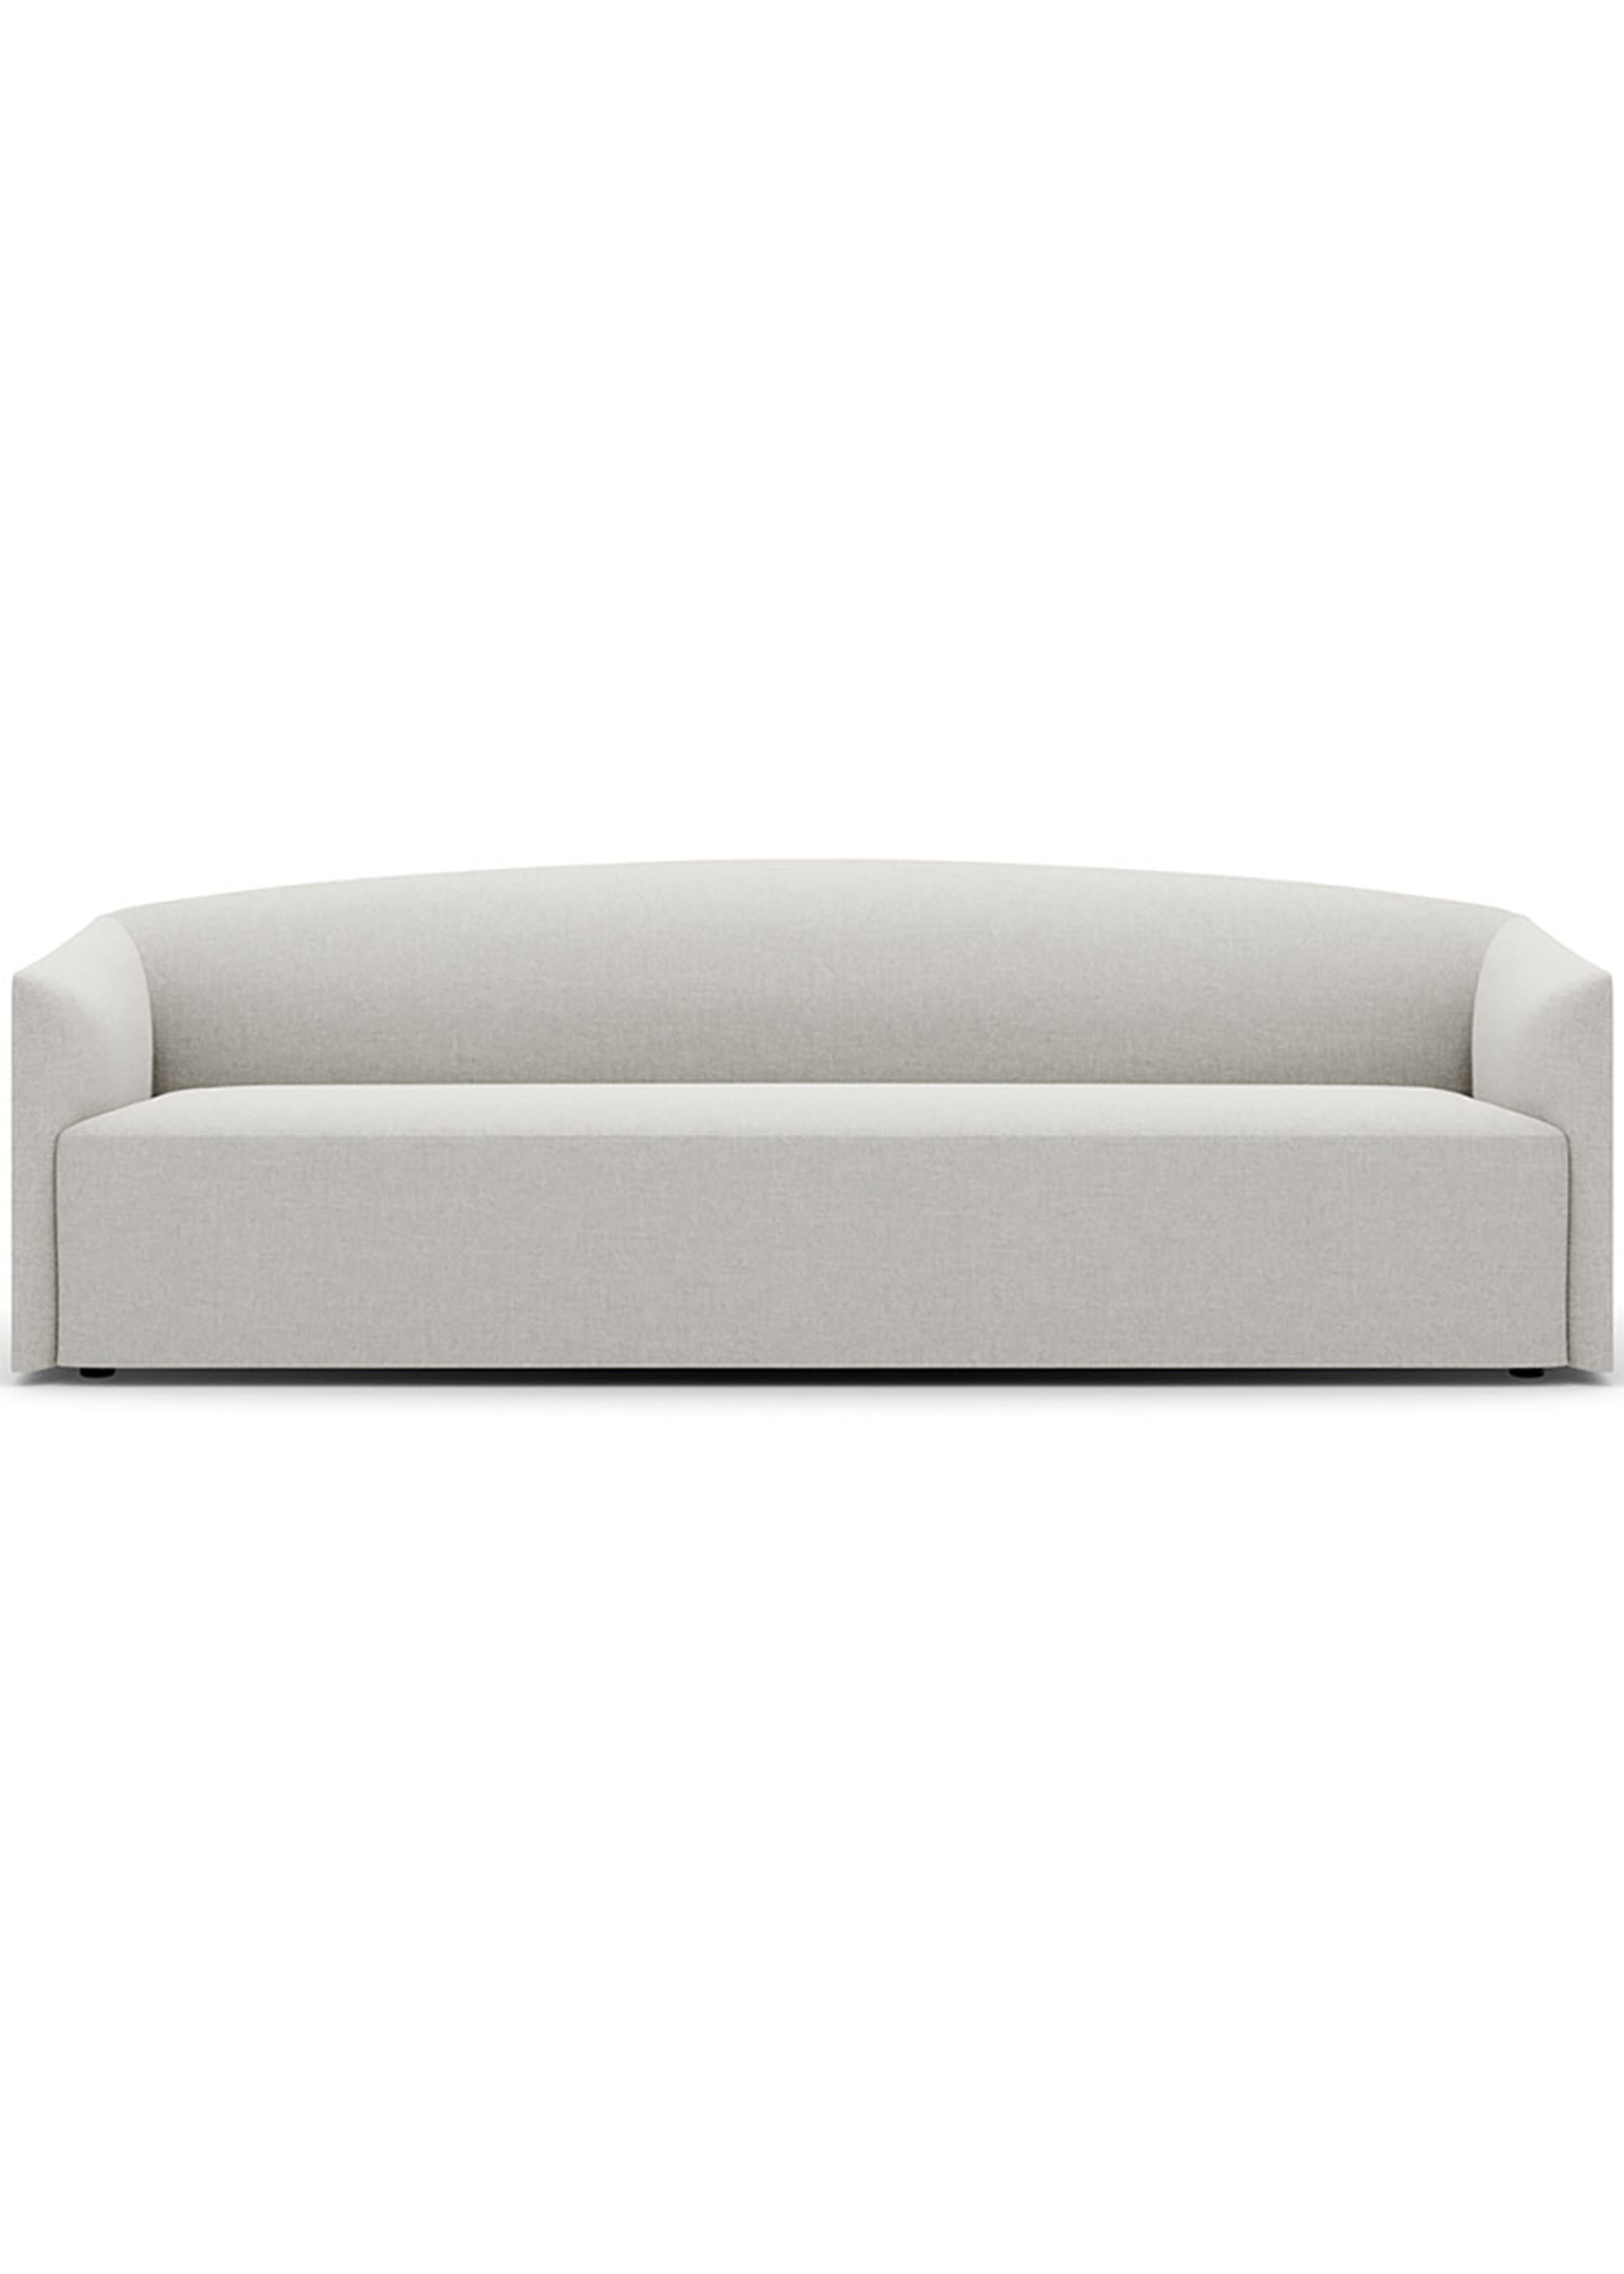 New Works - Sofá de 3 pessoas - Shore Sofa 3 Seater Extended Base - Ruskin Quill